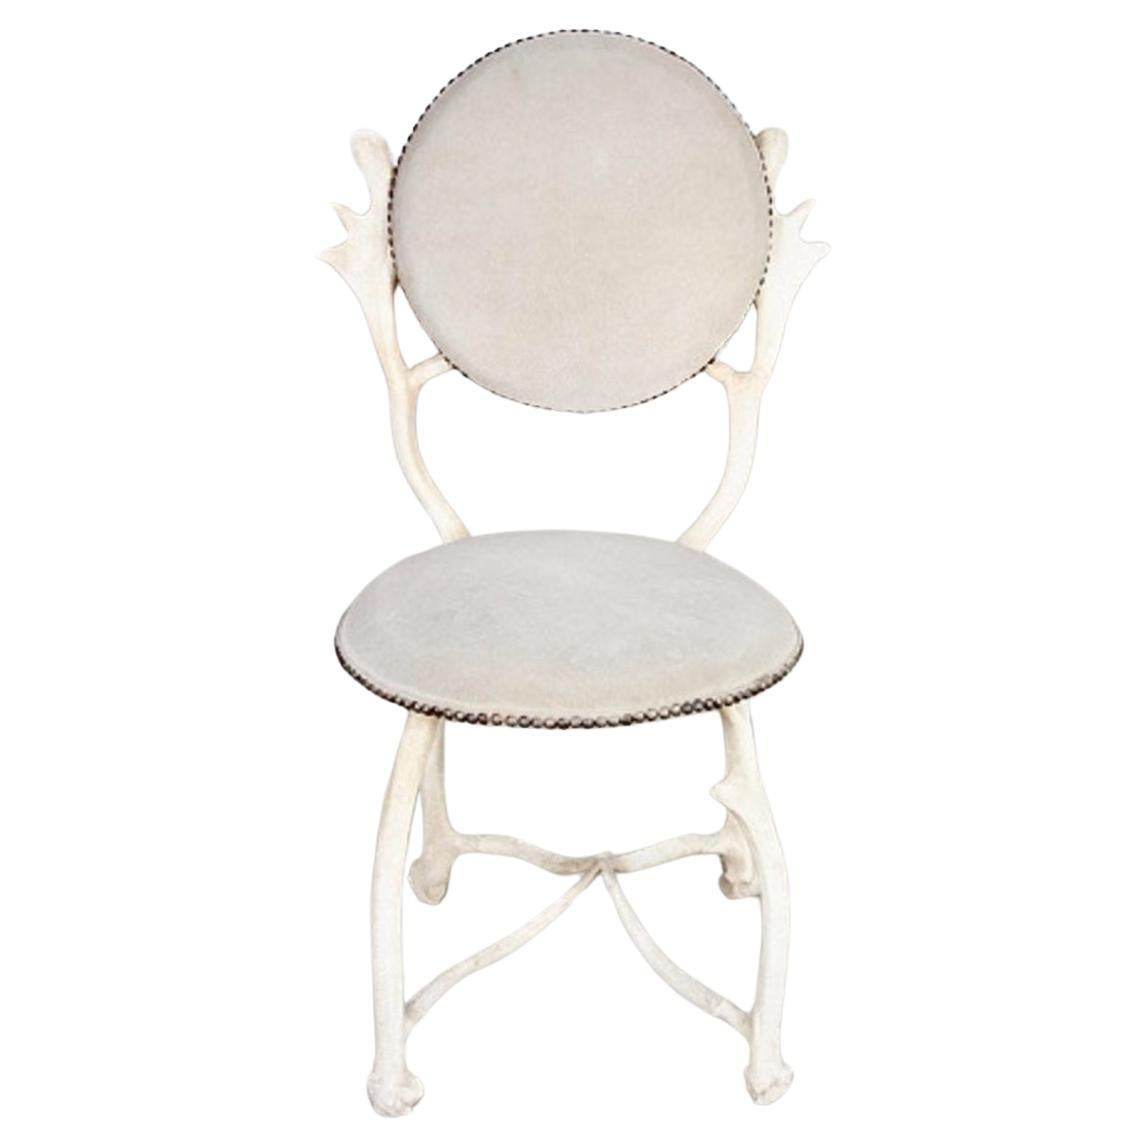 This is a great example of an Arthur Court Antler Chair. The chair dates to the 1970s and is in overall very good original condition with a white painted aluminum faux antler frame and a suede upholstery. The chair shows minor natural patina and is